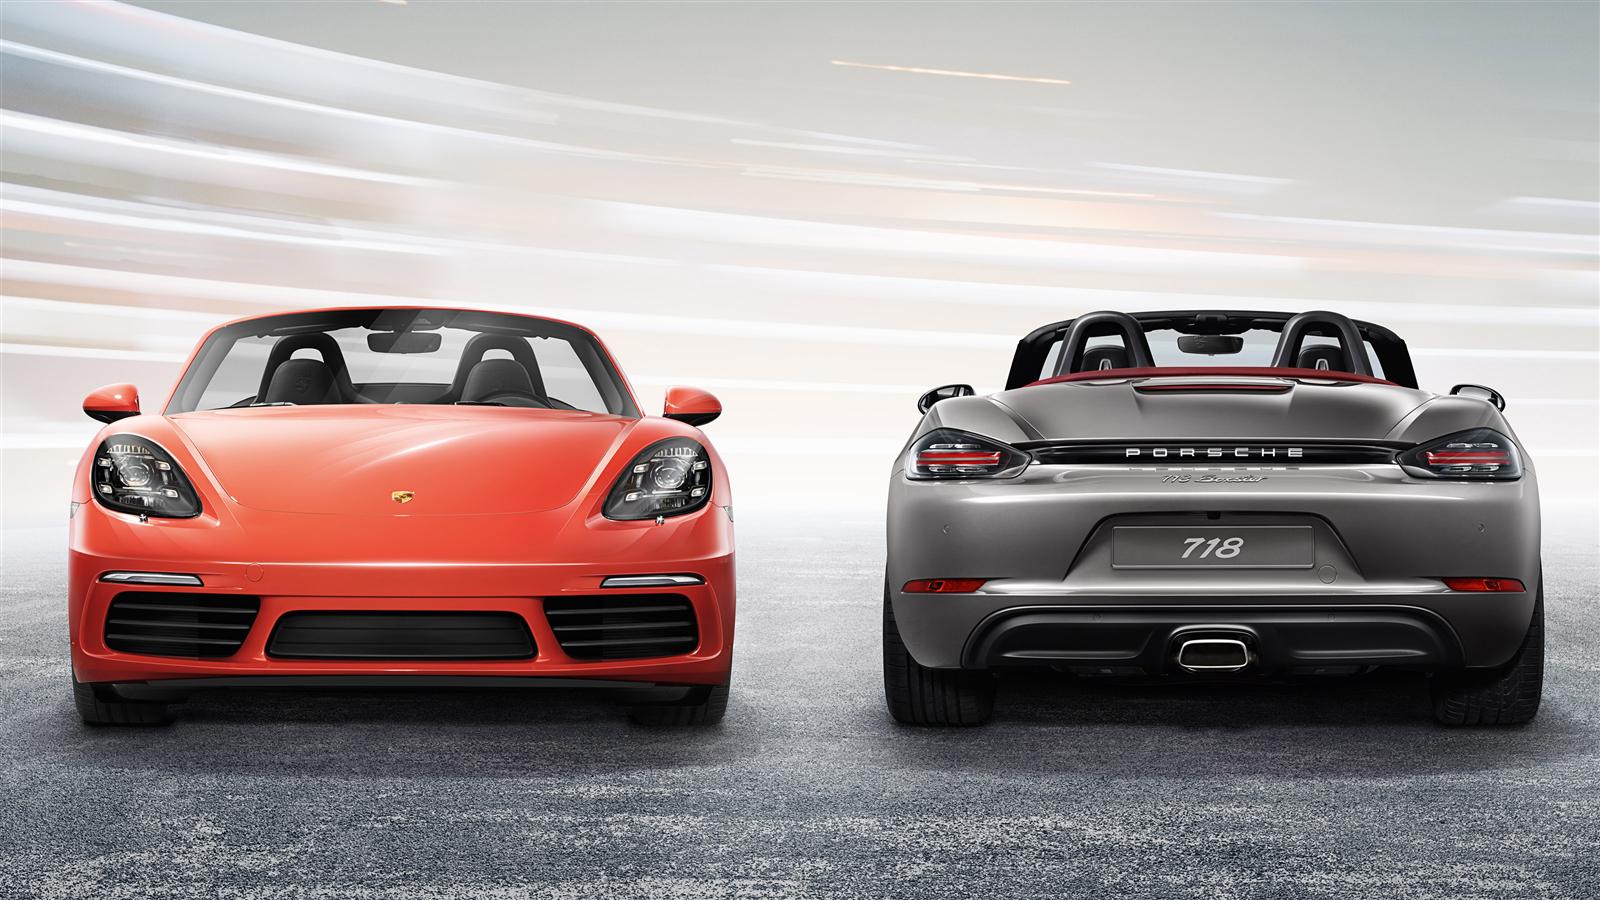 Updated 2017 Porsche 718 Boxster Front And Rear Profile